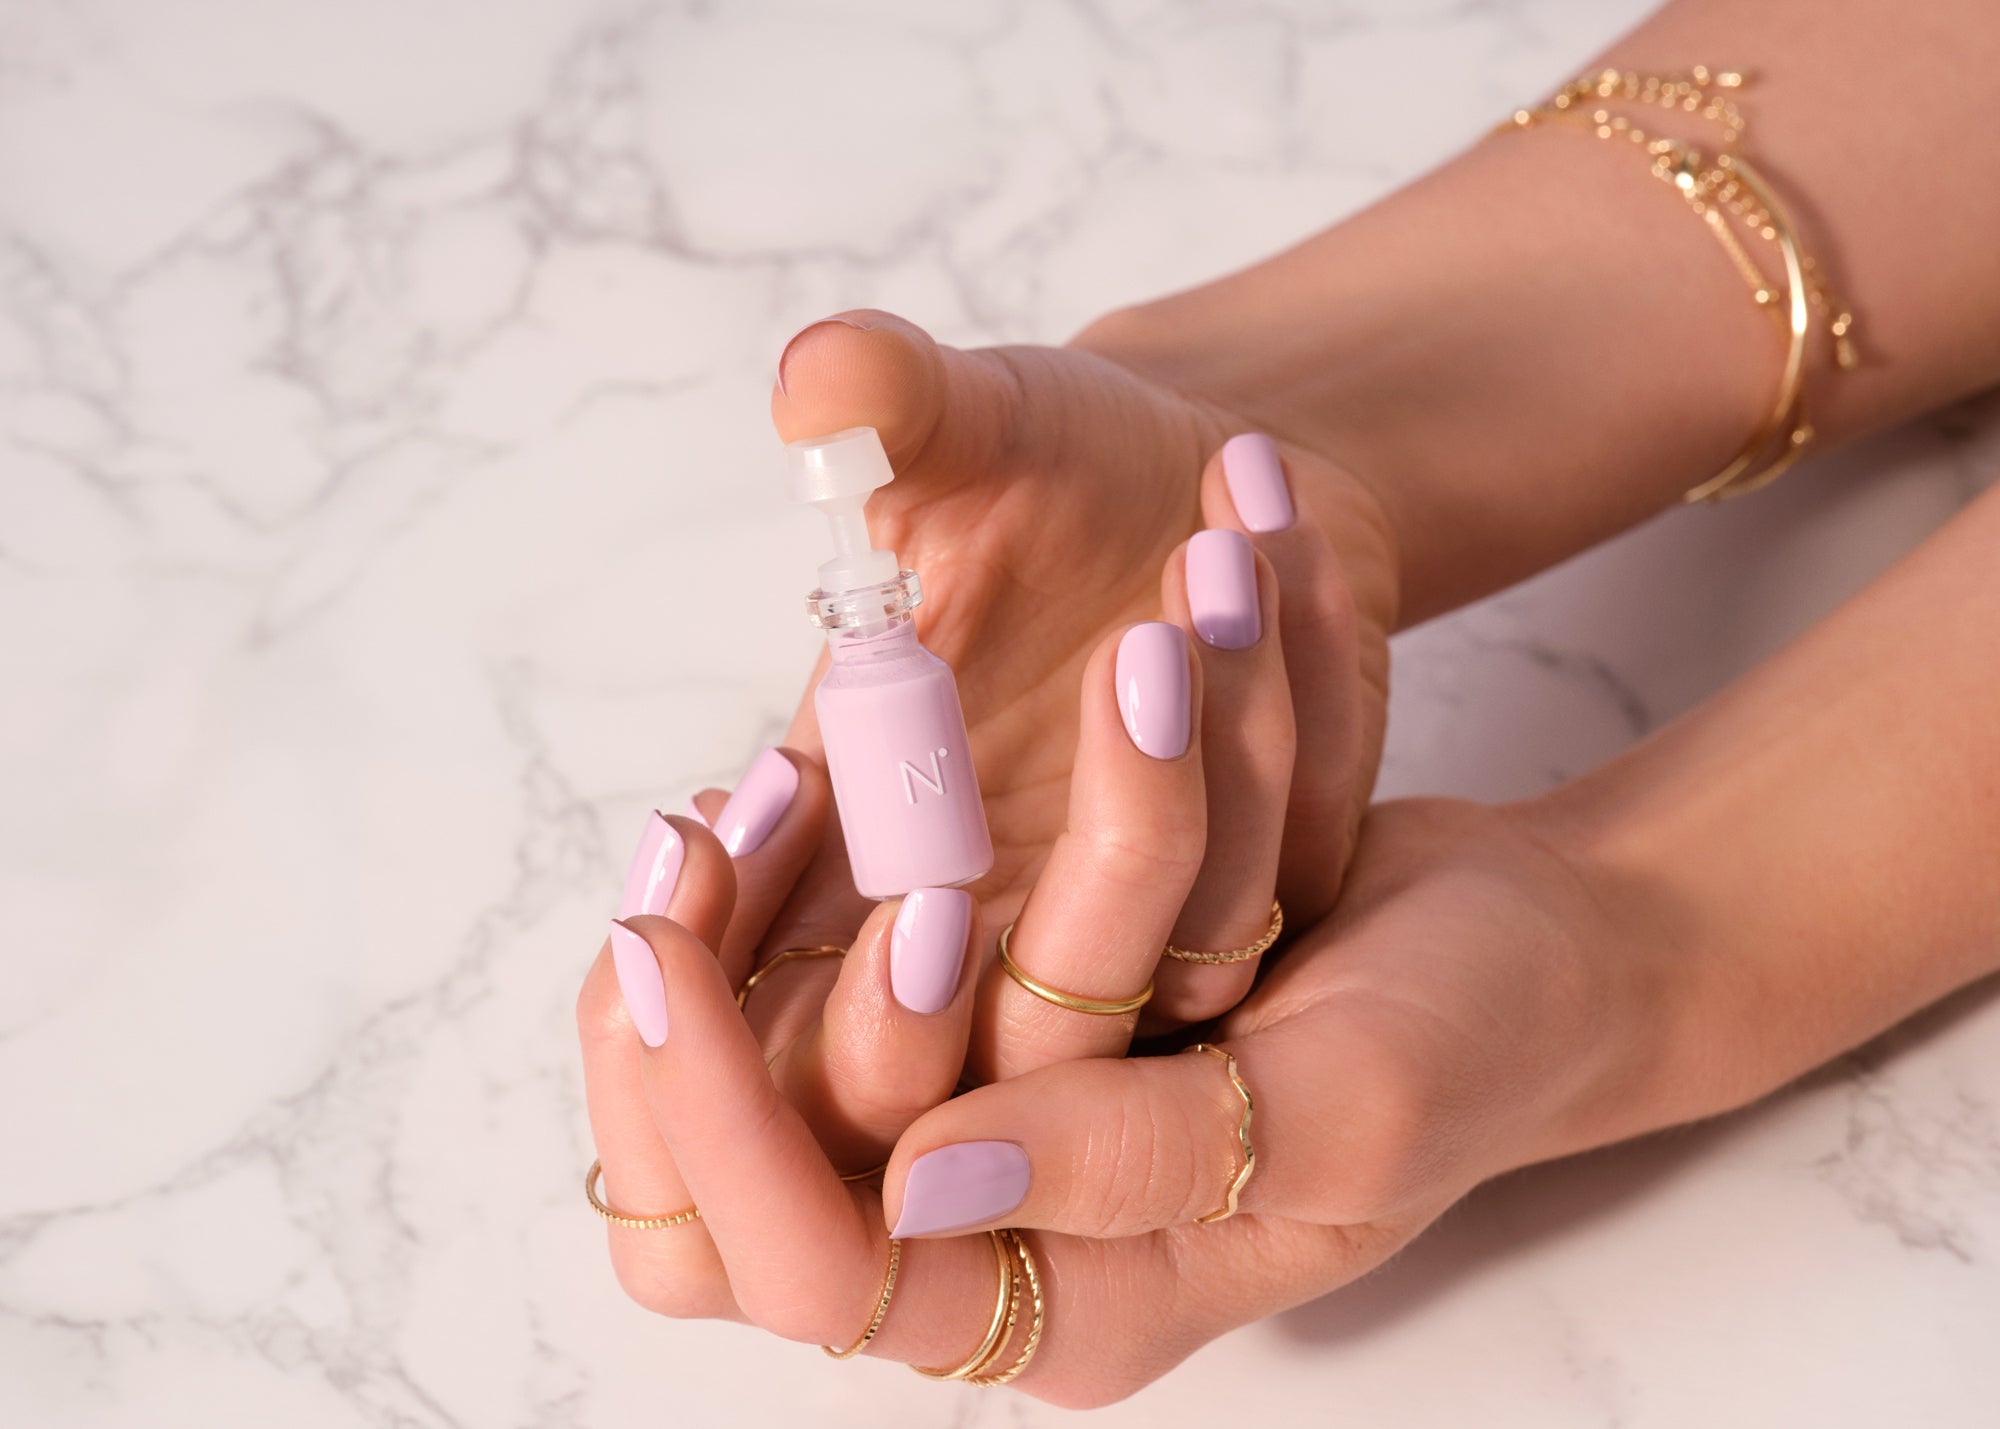 NIMBLE  Salon Quality Nails From The Comfort of Your Home. by Nimble —  Kickstarter